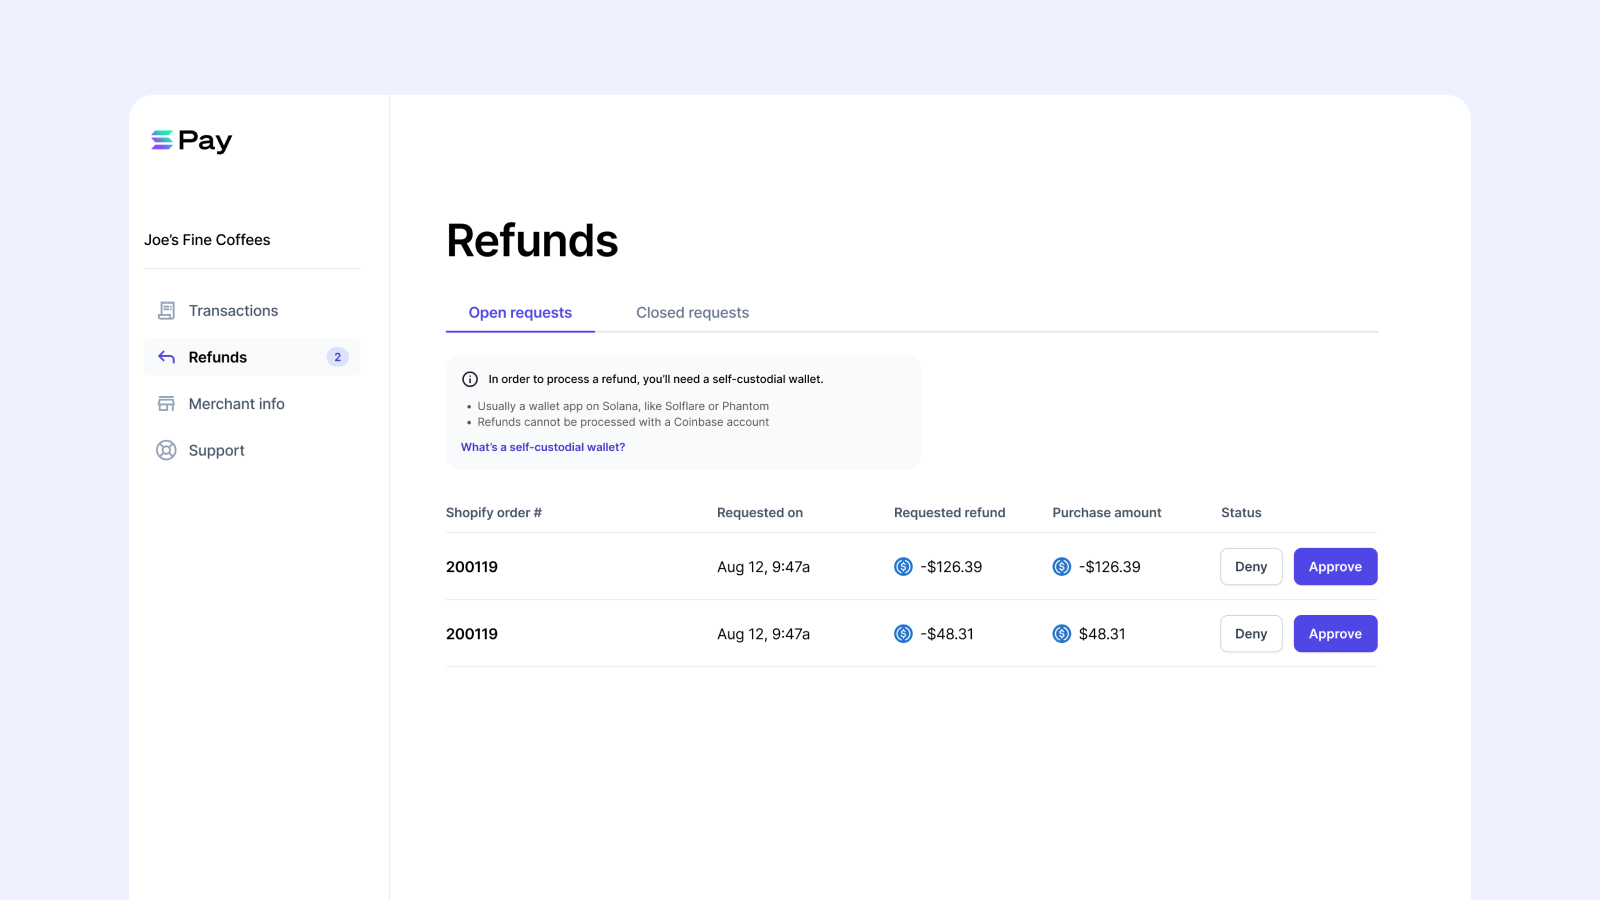 Process refunds by connecting your wallet.